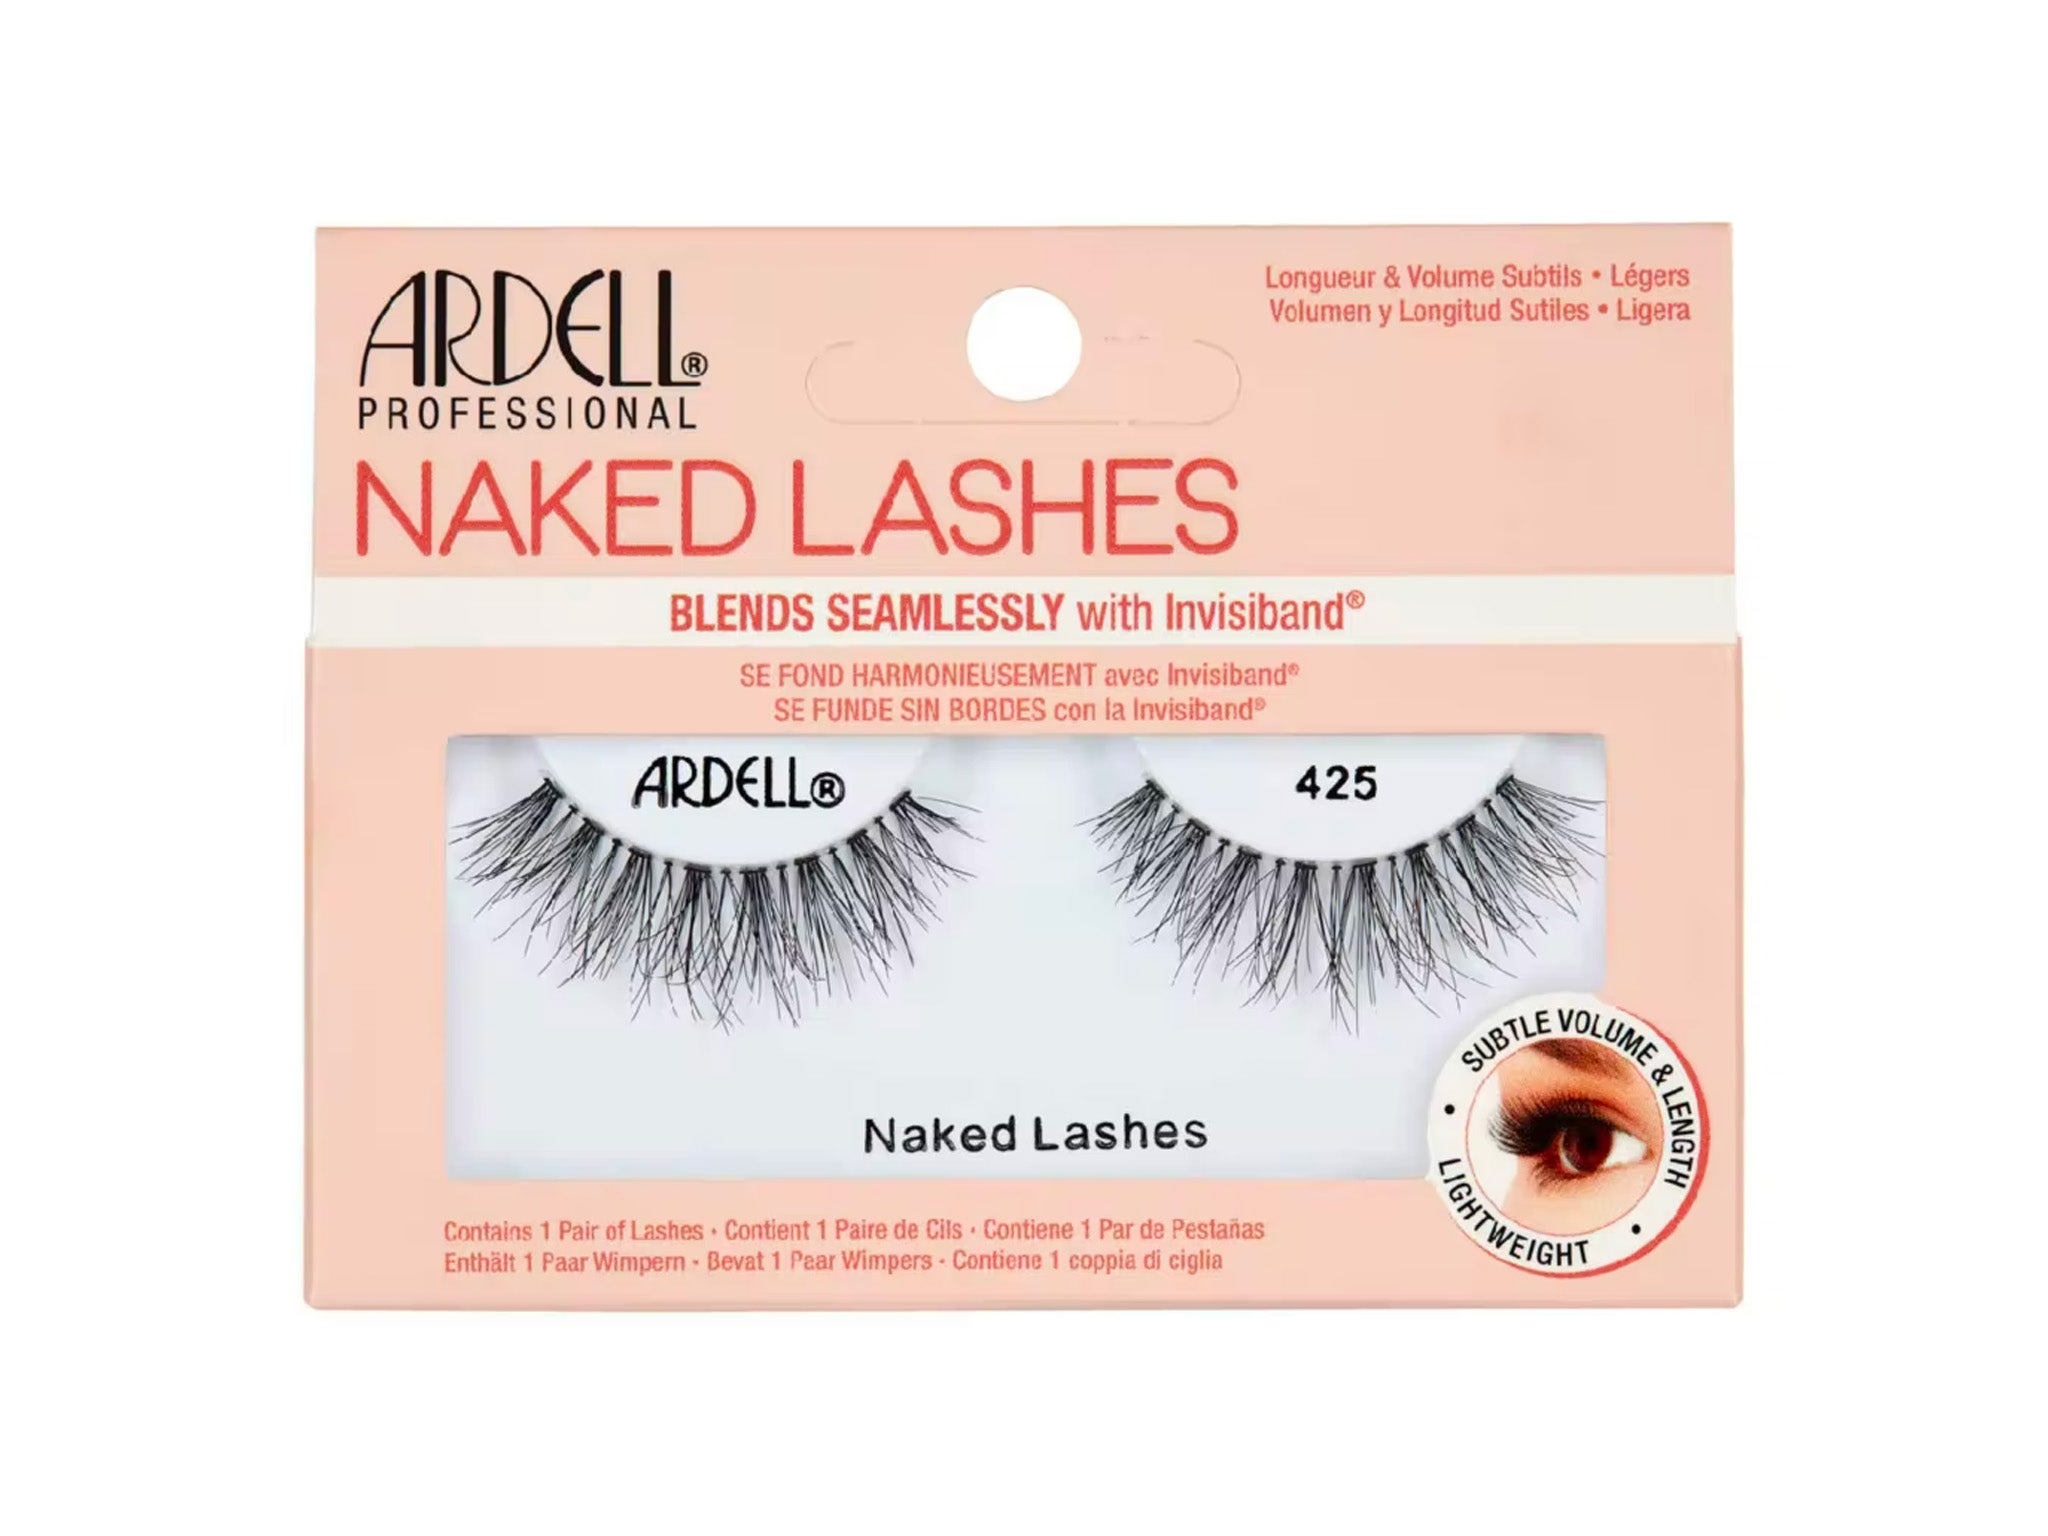 Ardell naked lashes 425